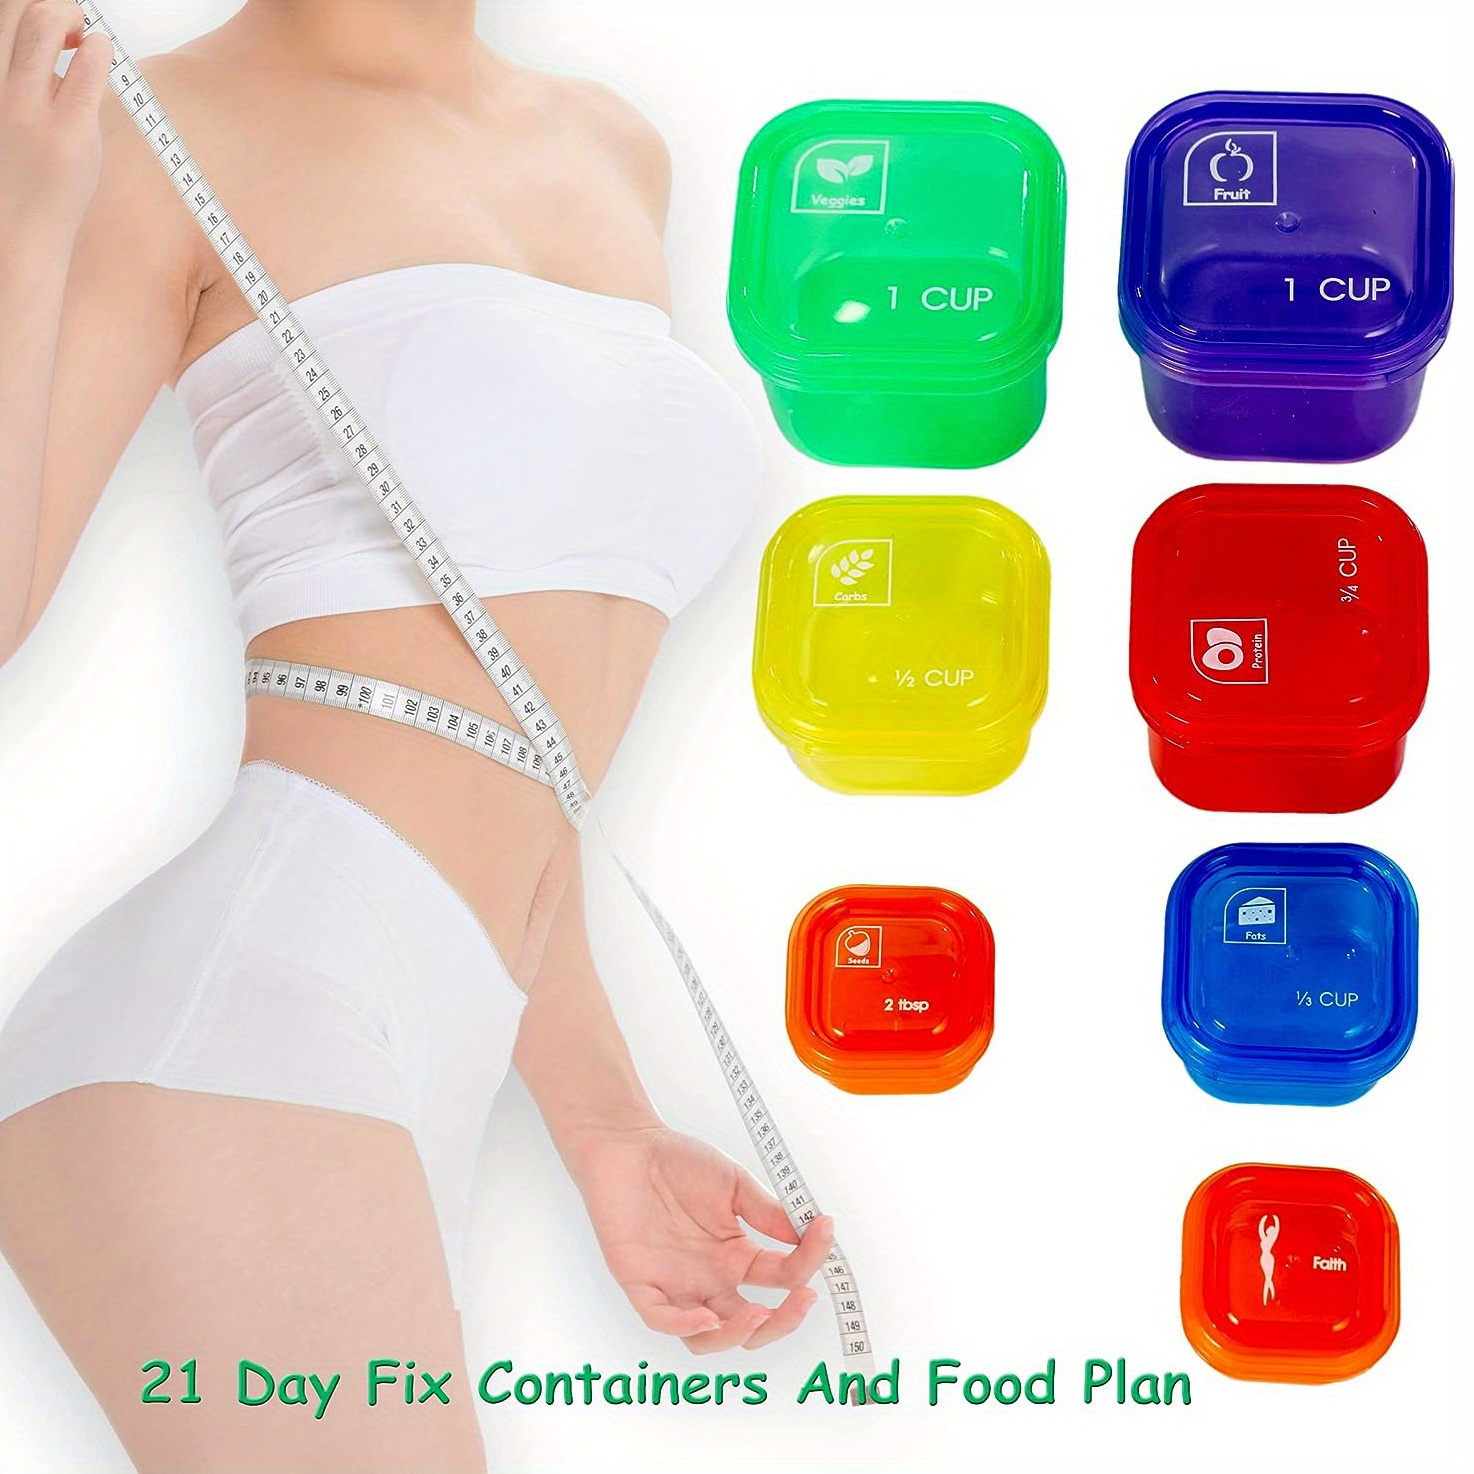 Portion Control Container Kit,21 Day Fix Containers and Food Plan,Multi  Color